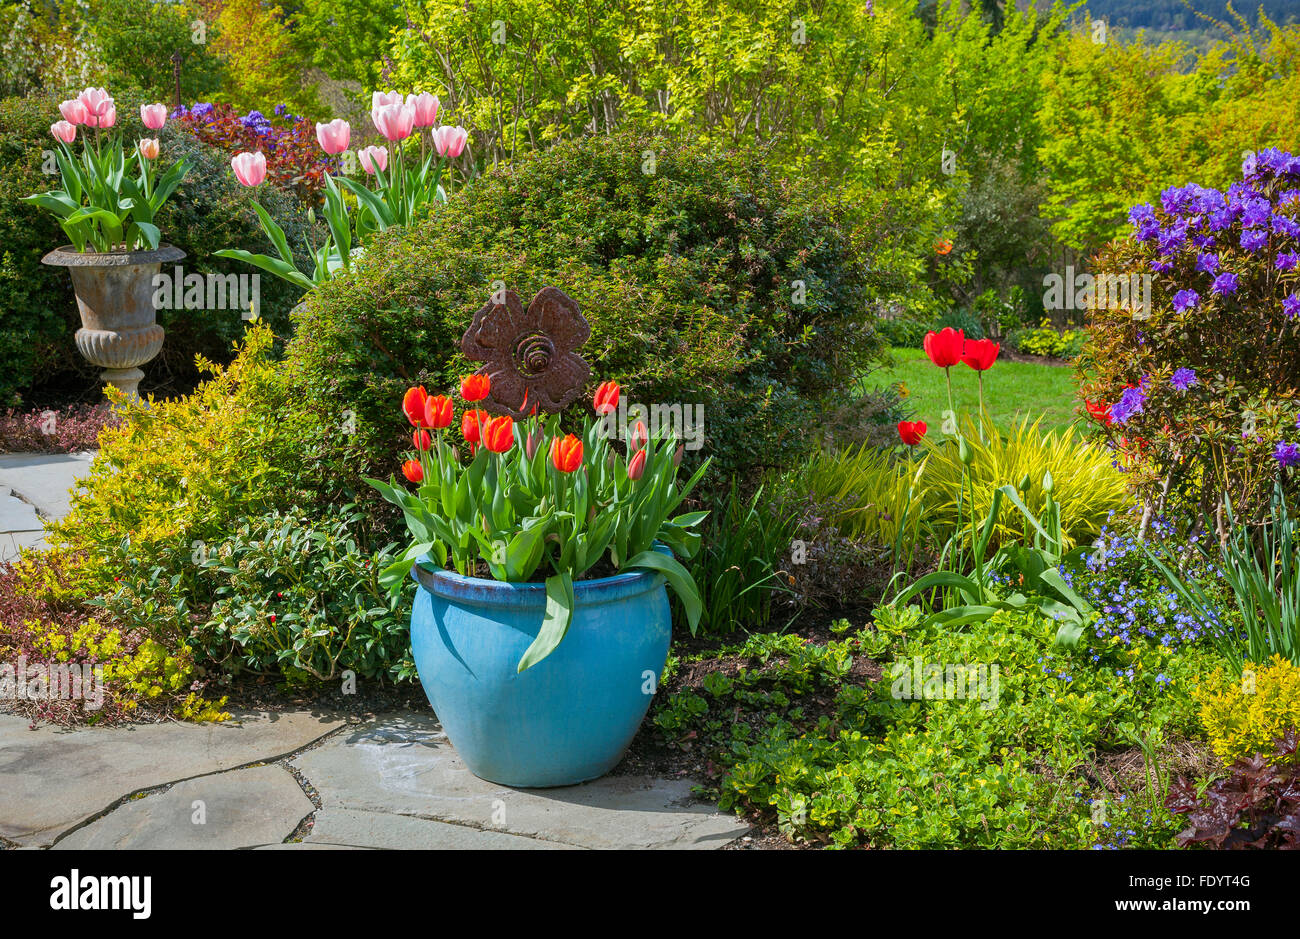 Vashon-Maury Island, WA: Flagstone patio featuring colorful pots with tulips edged by perennial garden beds. Stock Photo